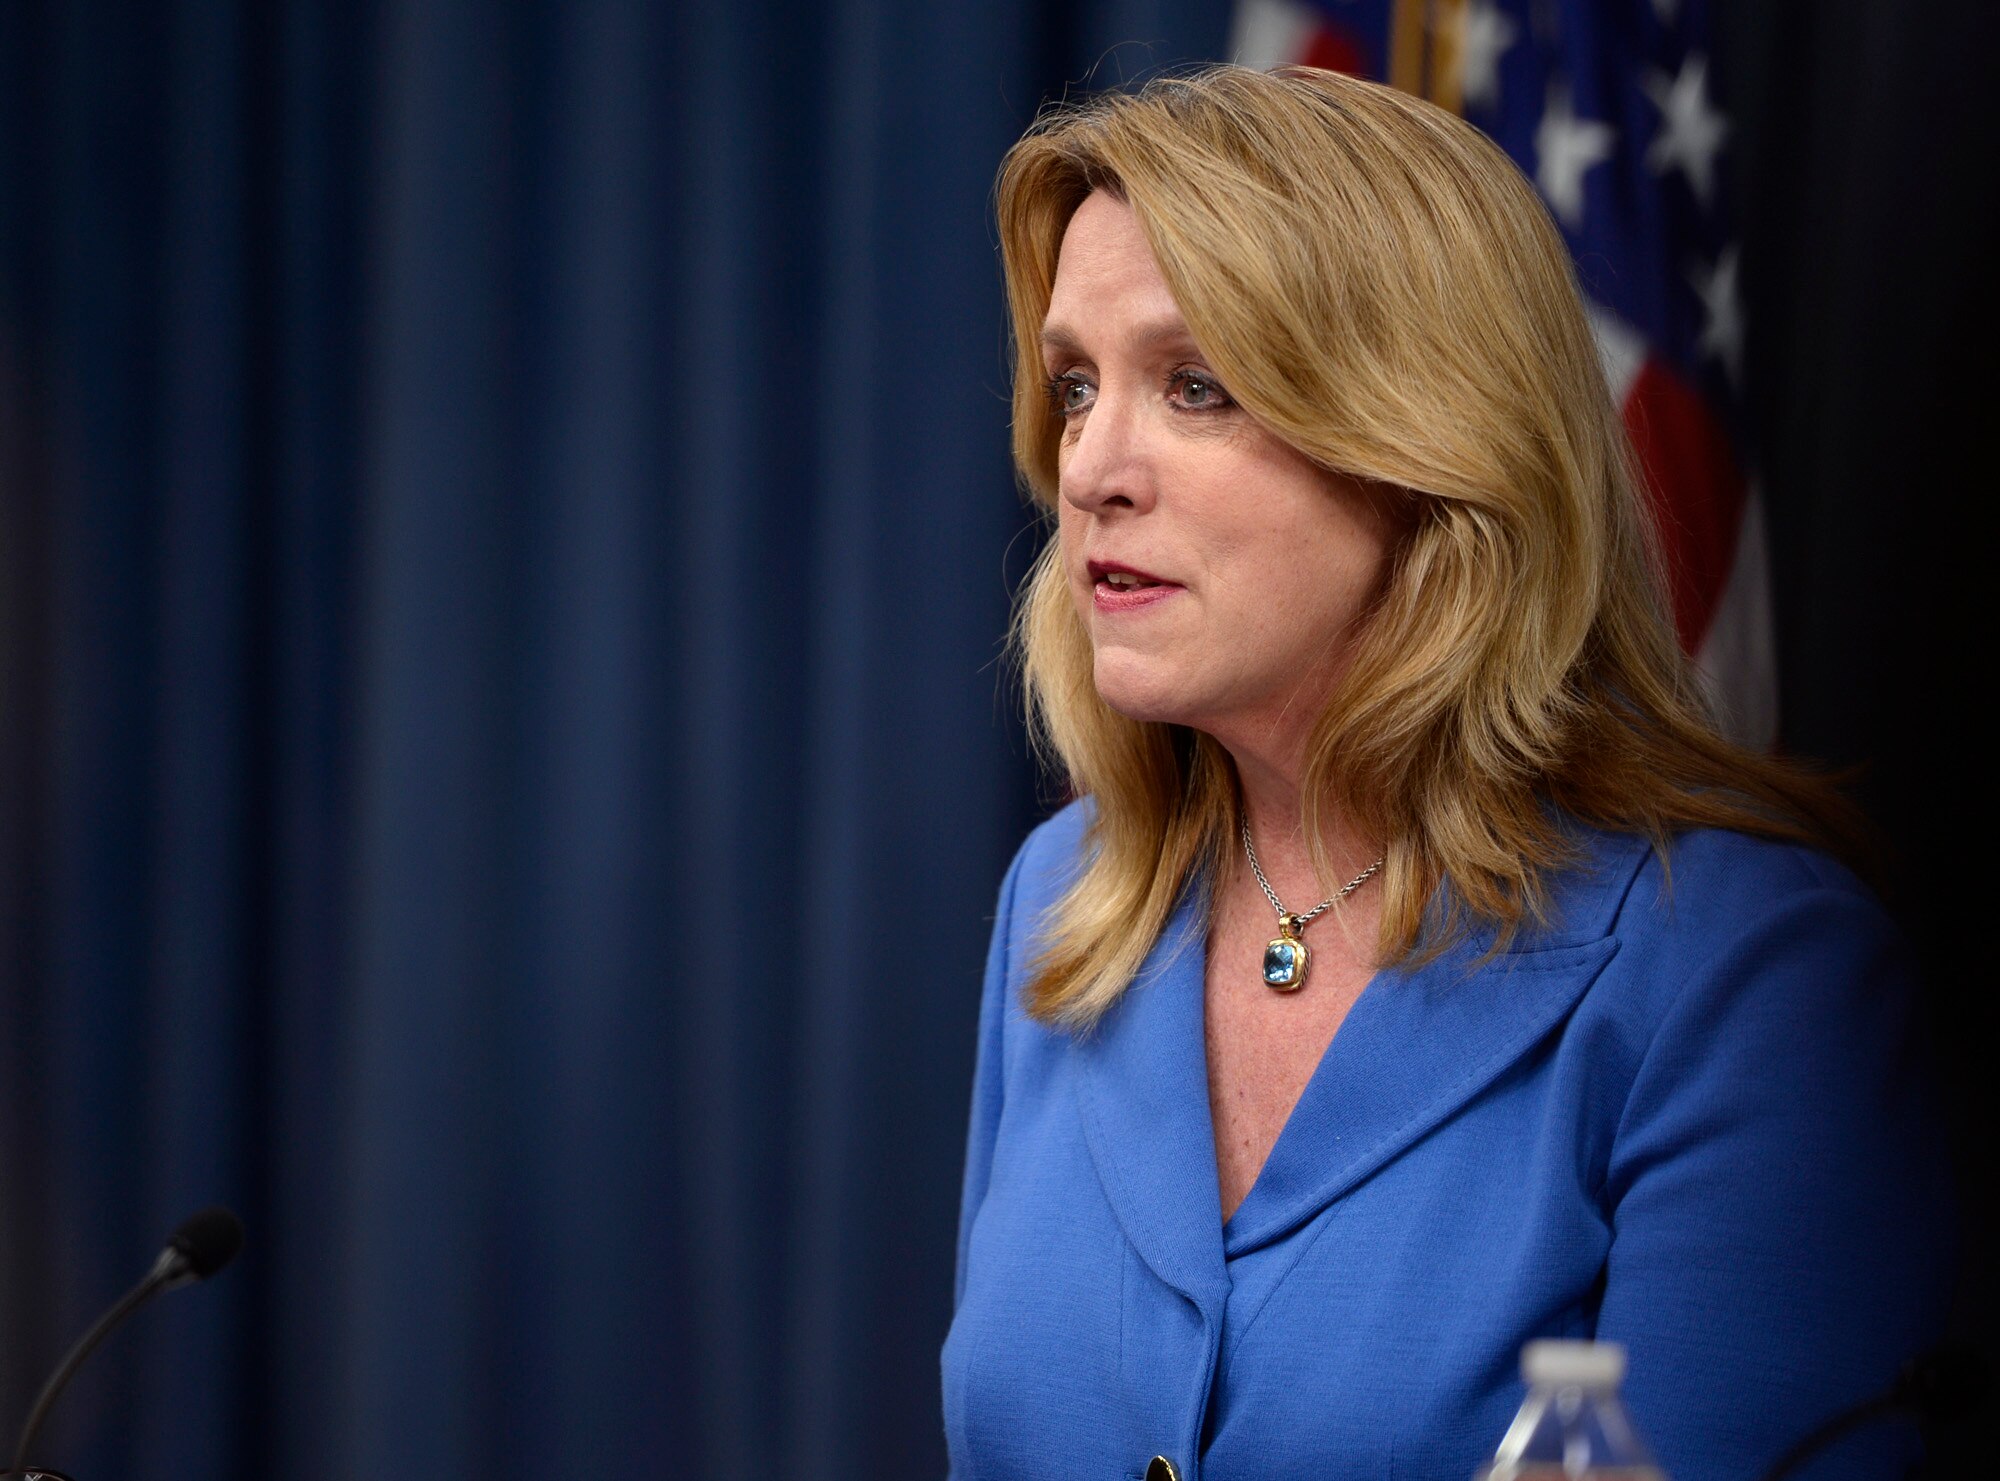 Secretary of the Air Force Deborah Lee James gives a press conference on the "State of the Air Force" in the Pentagon March 7, 2016. (U.S. Air Force photo/Scott M. Ash)